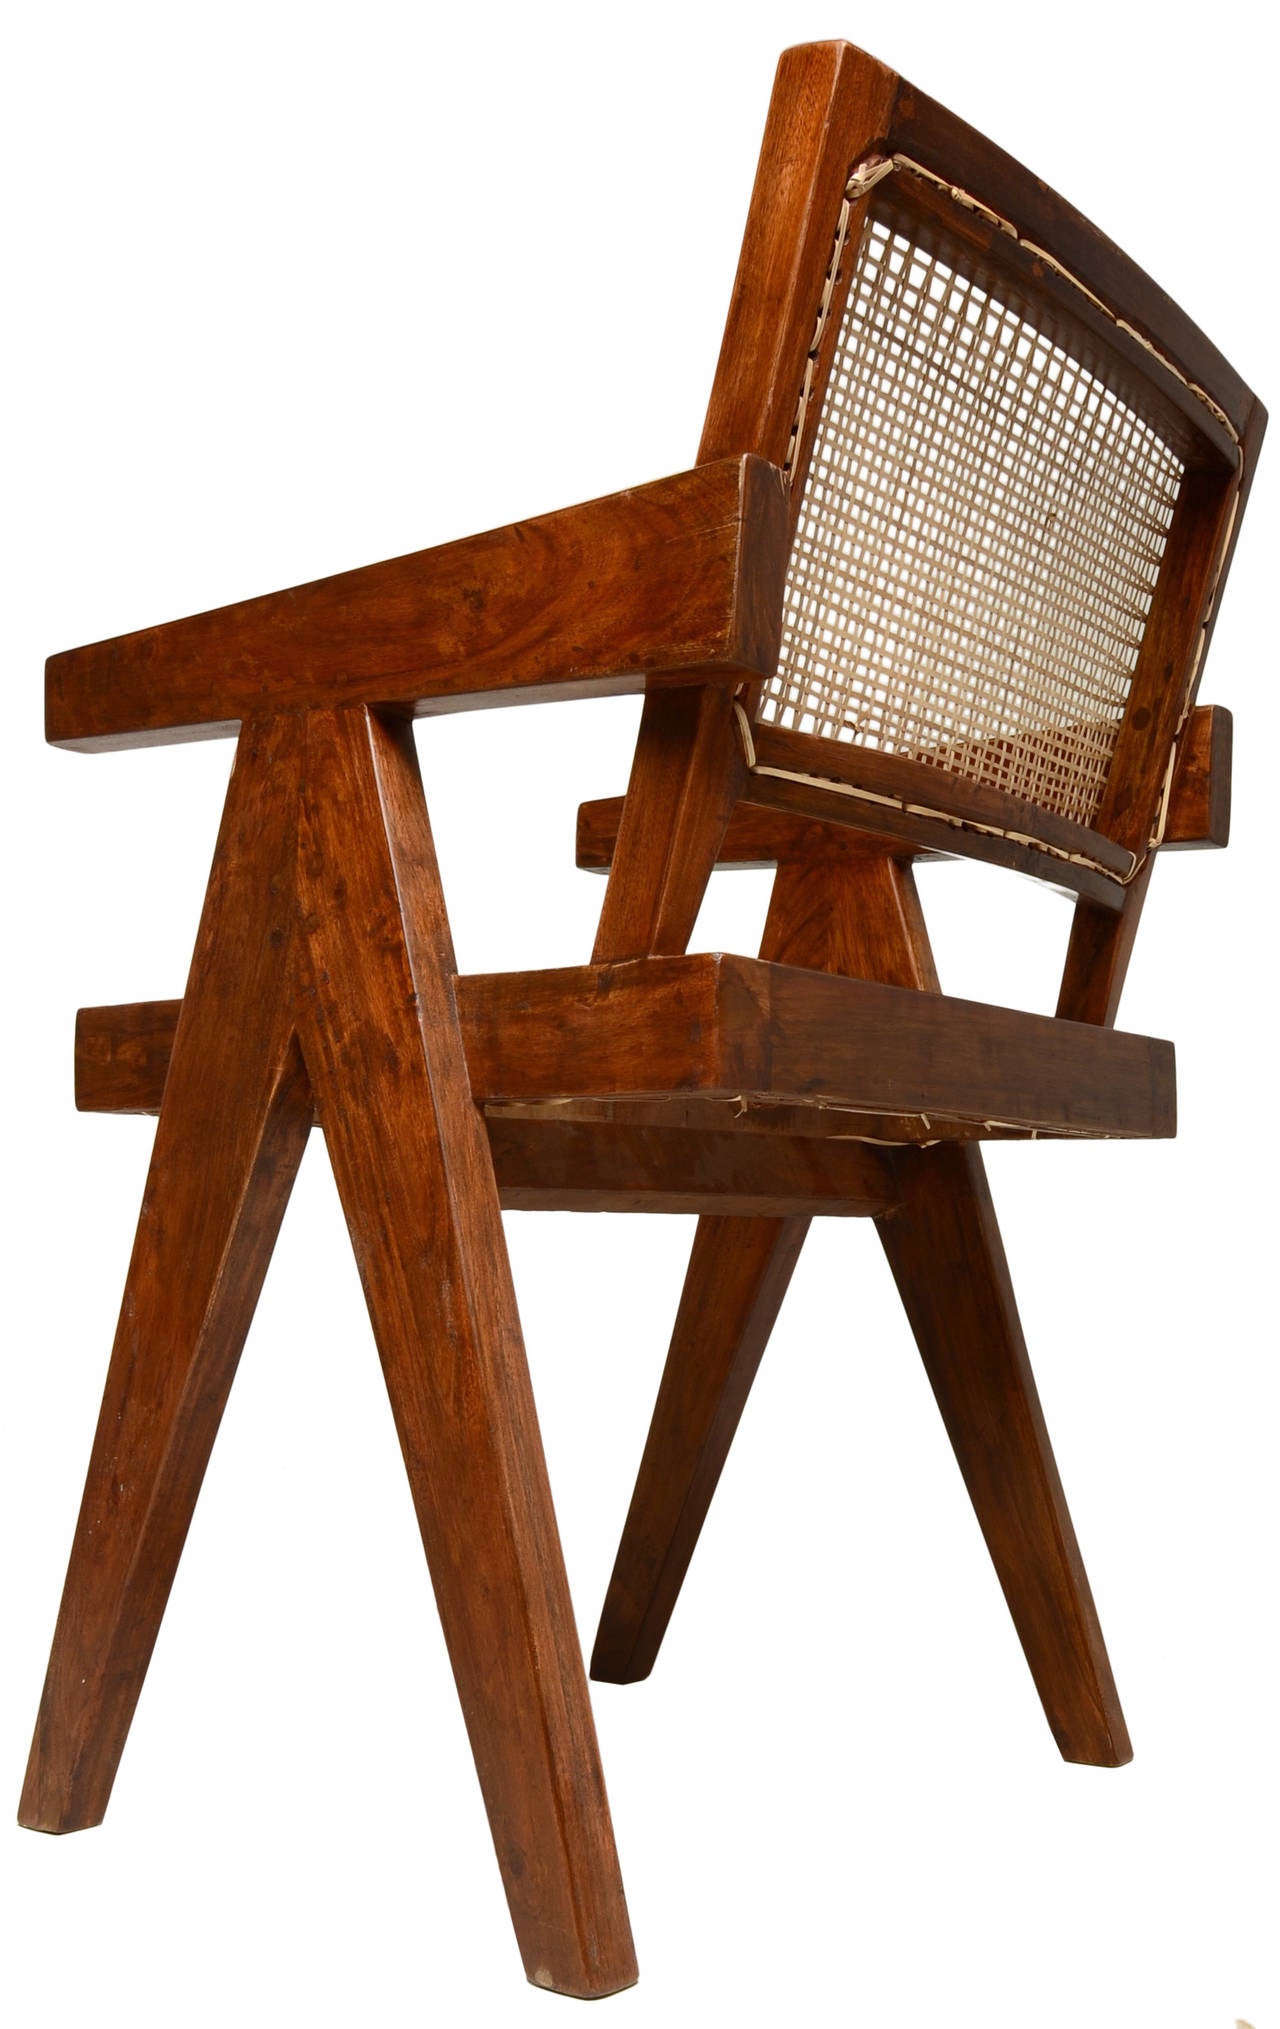 Woven Desk and Chair for Chandigarh by Pierre Jeanneret